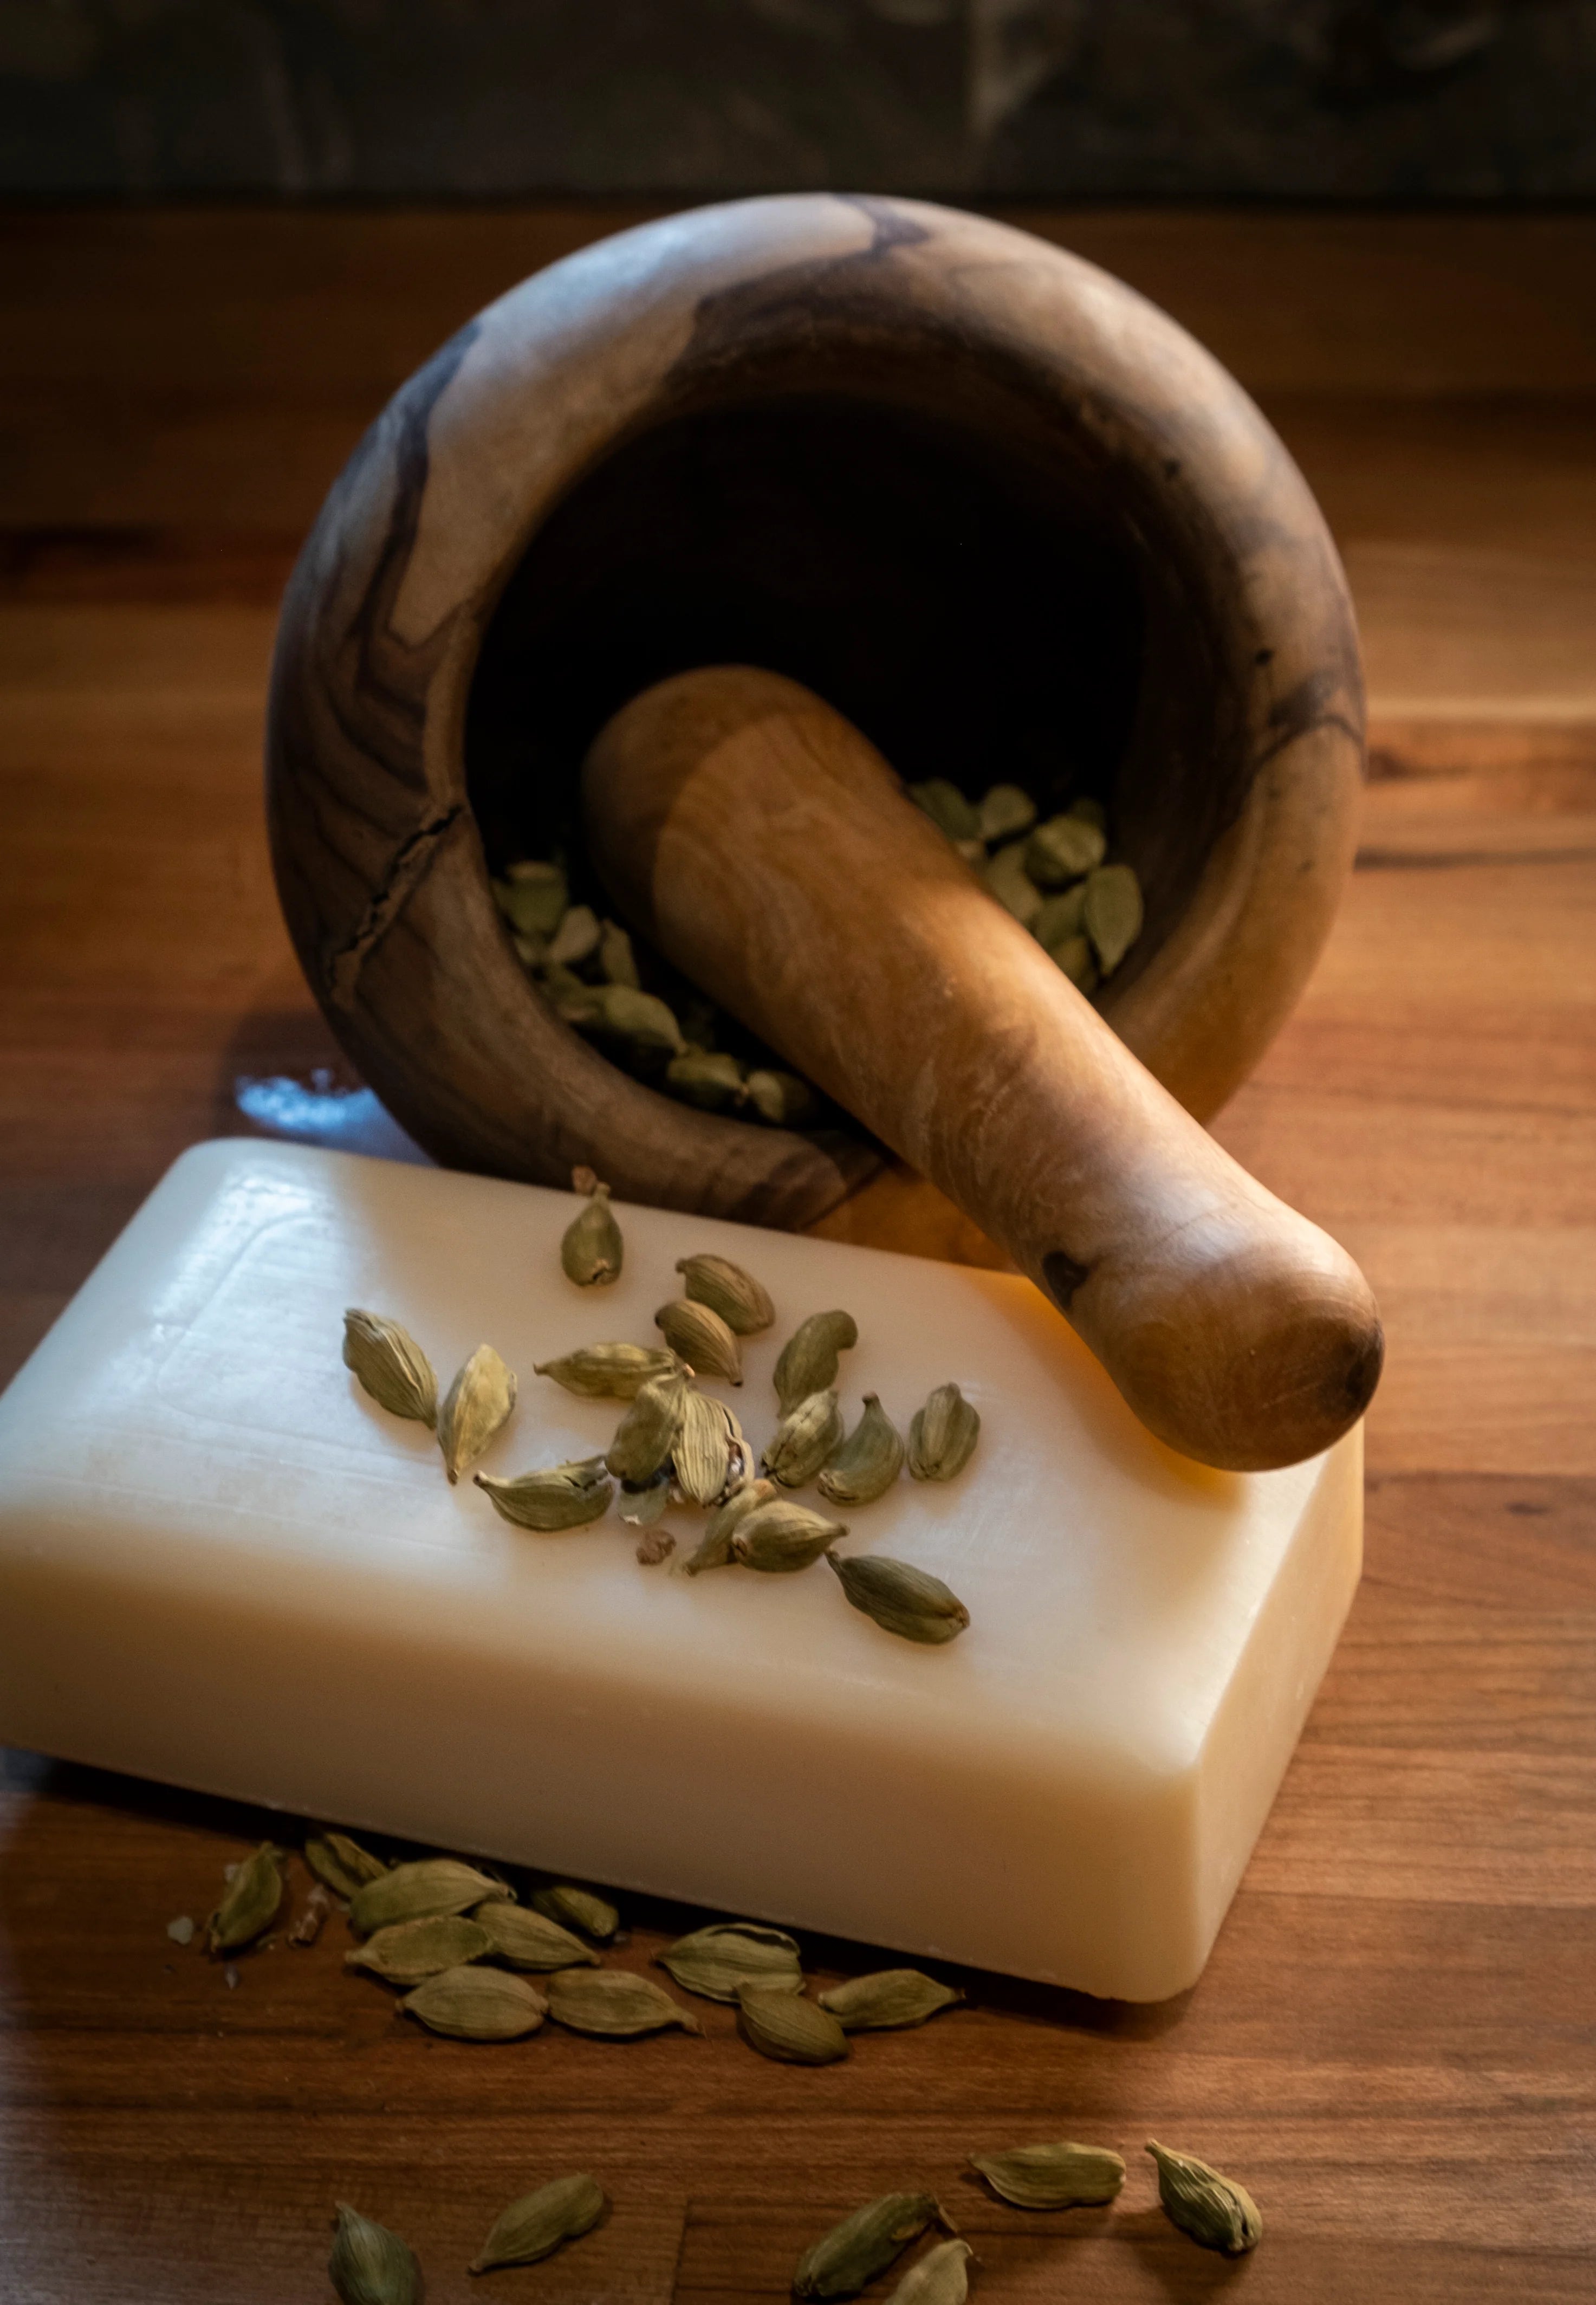 Man Bar soap with dried cardamom and a mortar with pestle